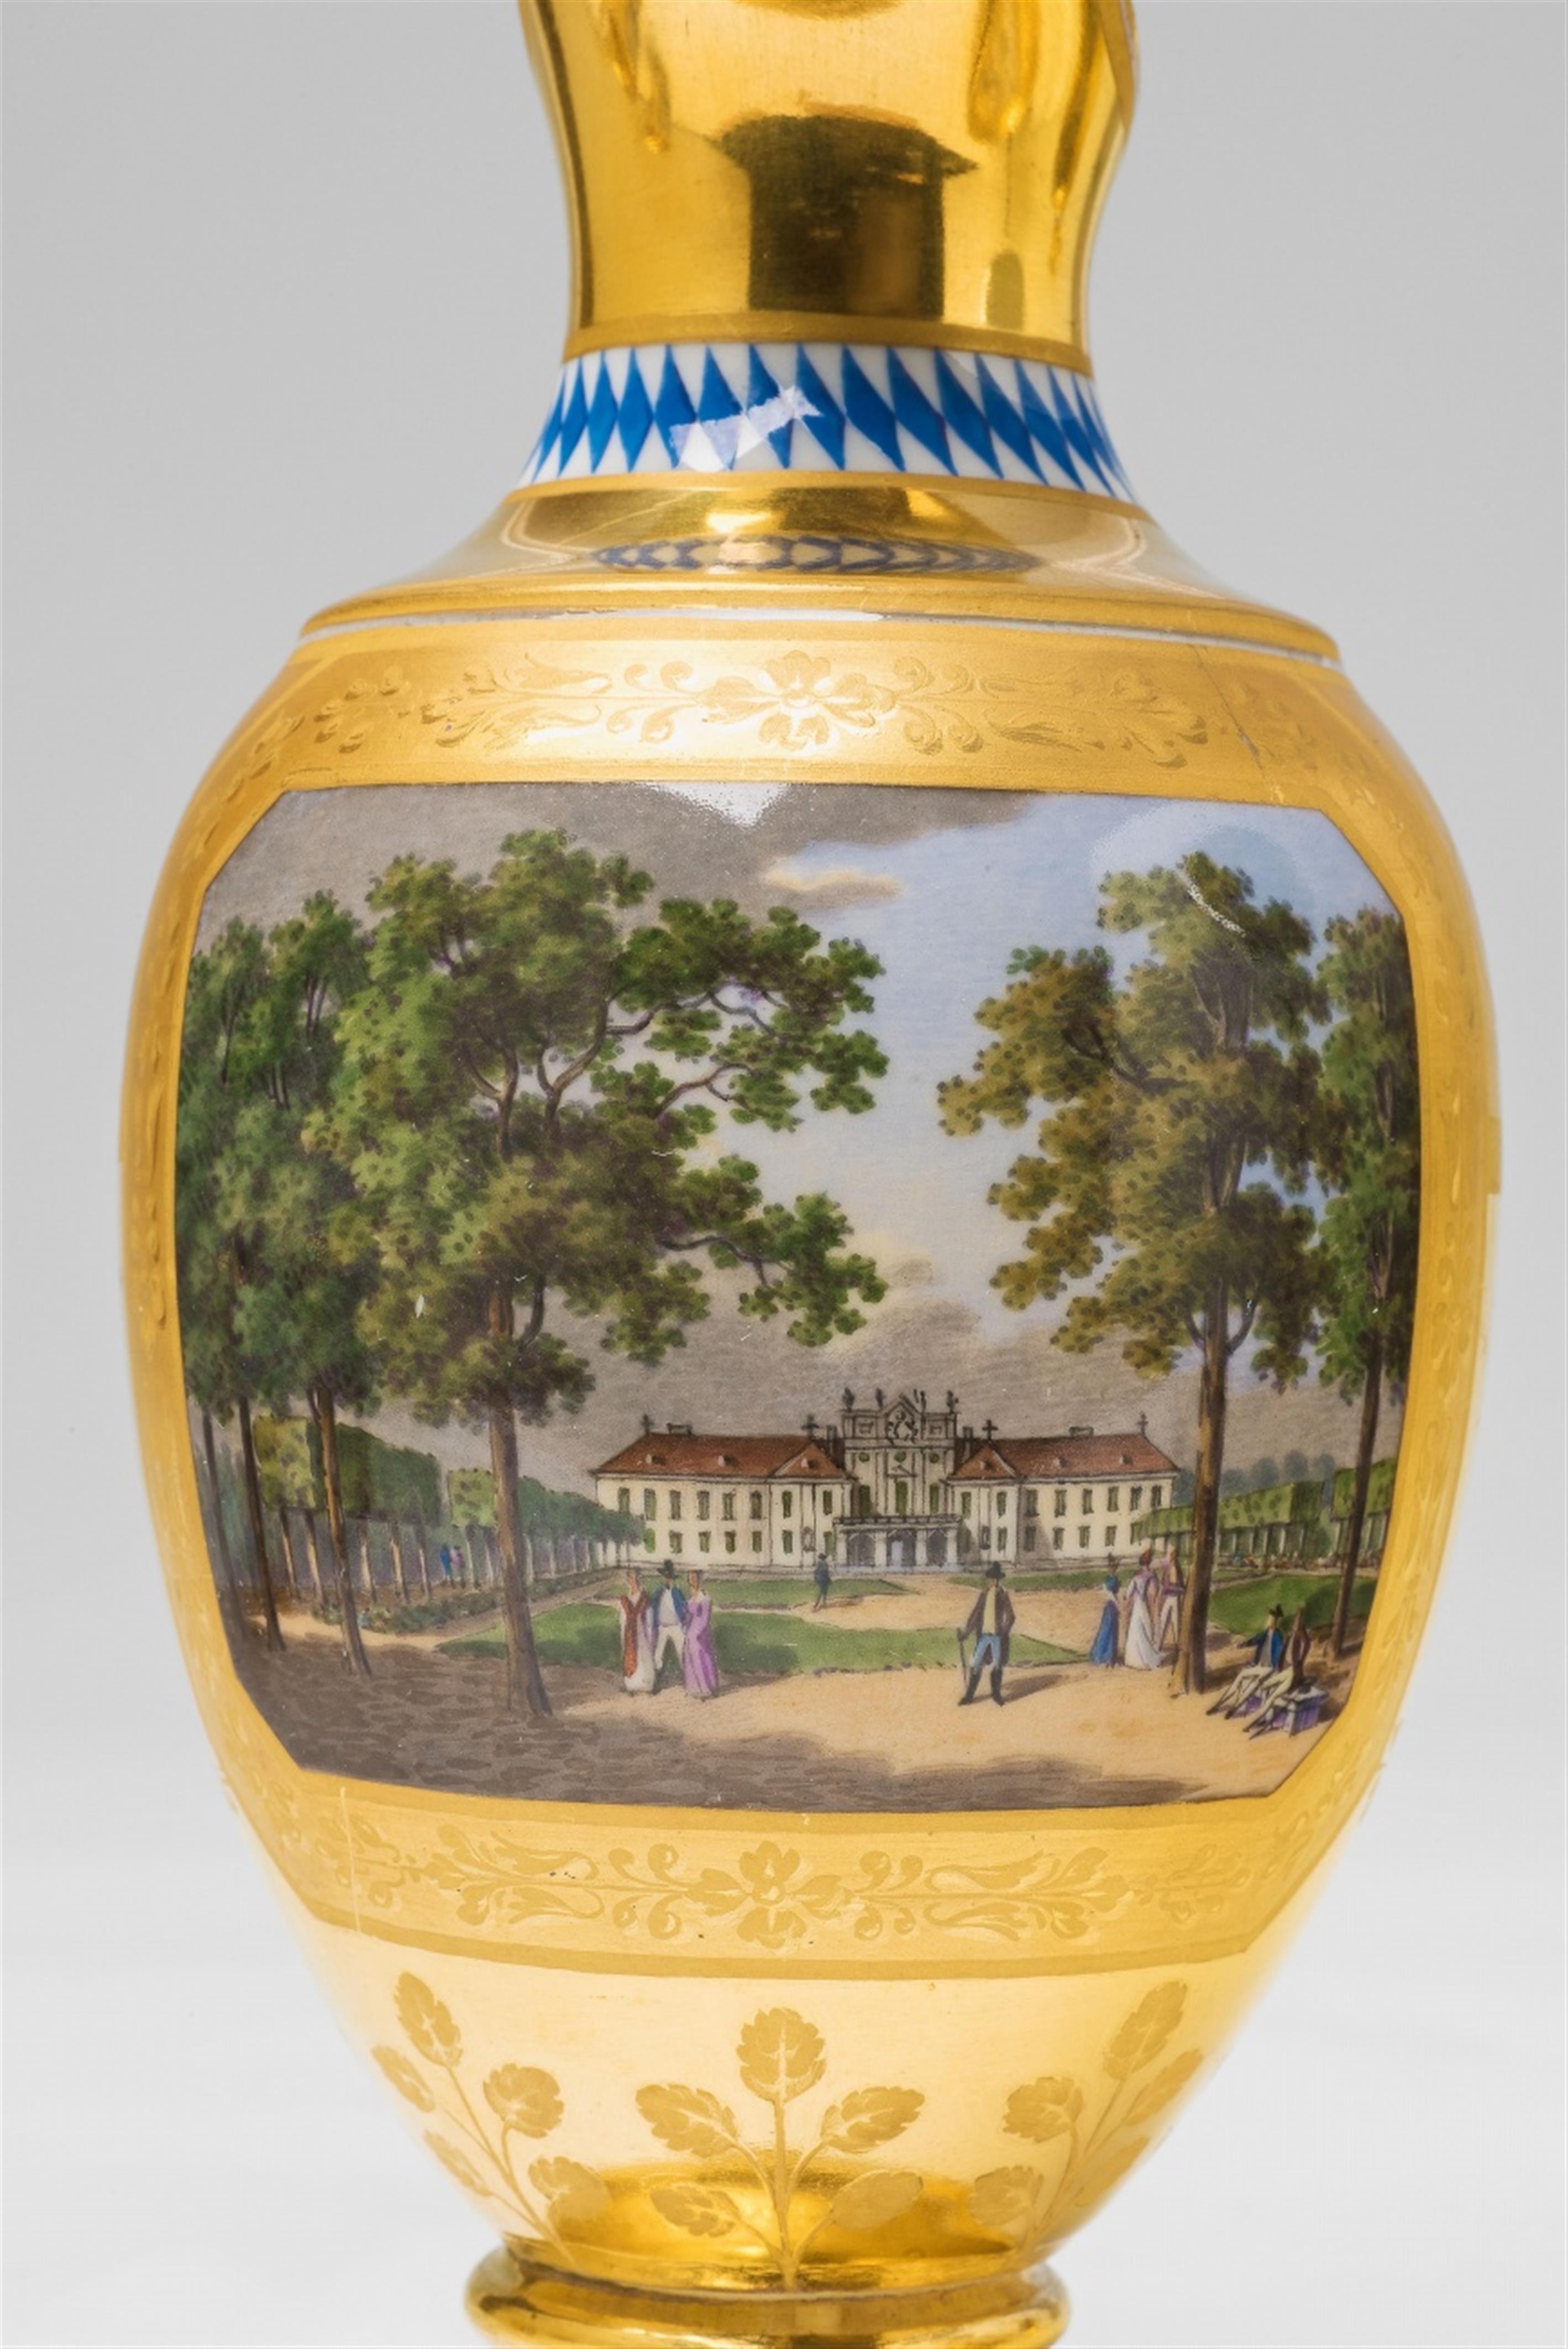 A Niedermayer porcelain déjeuner with views of imperial palaces in Vienna - image-6